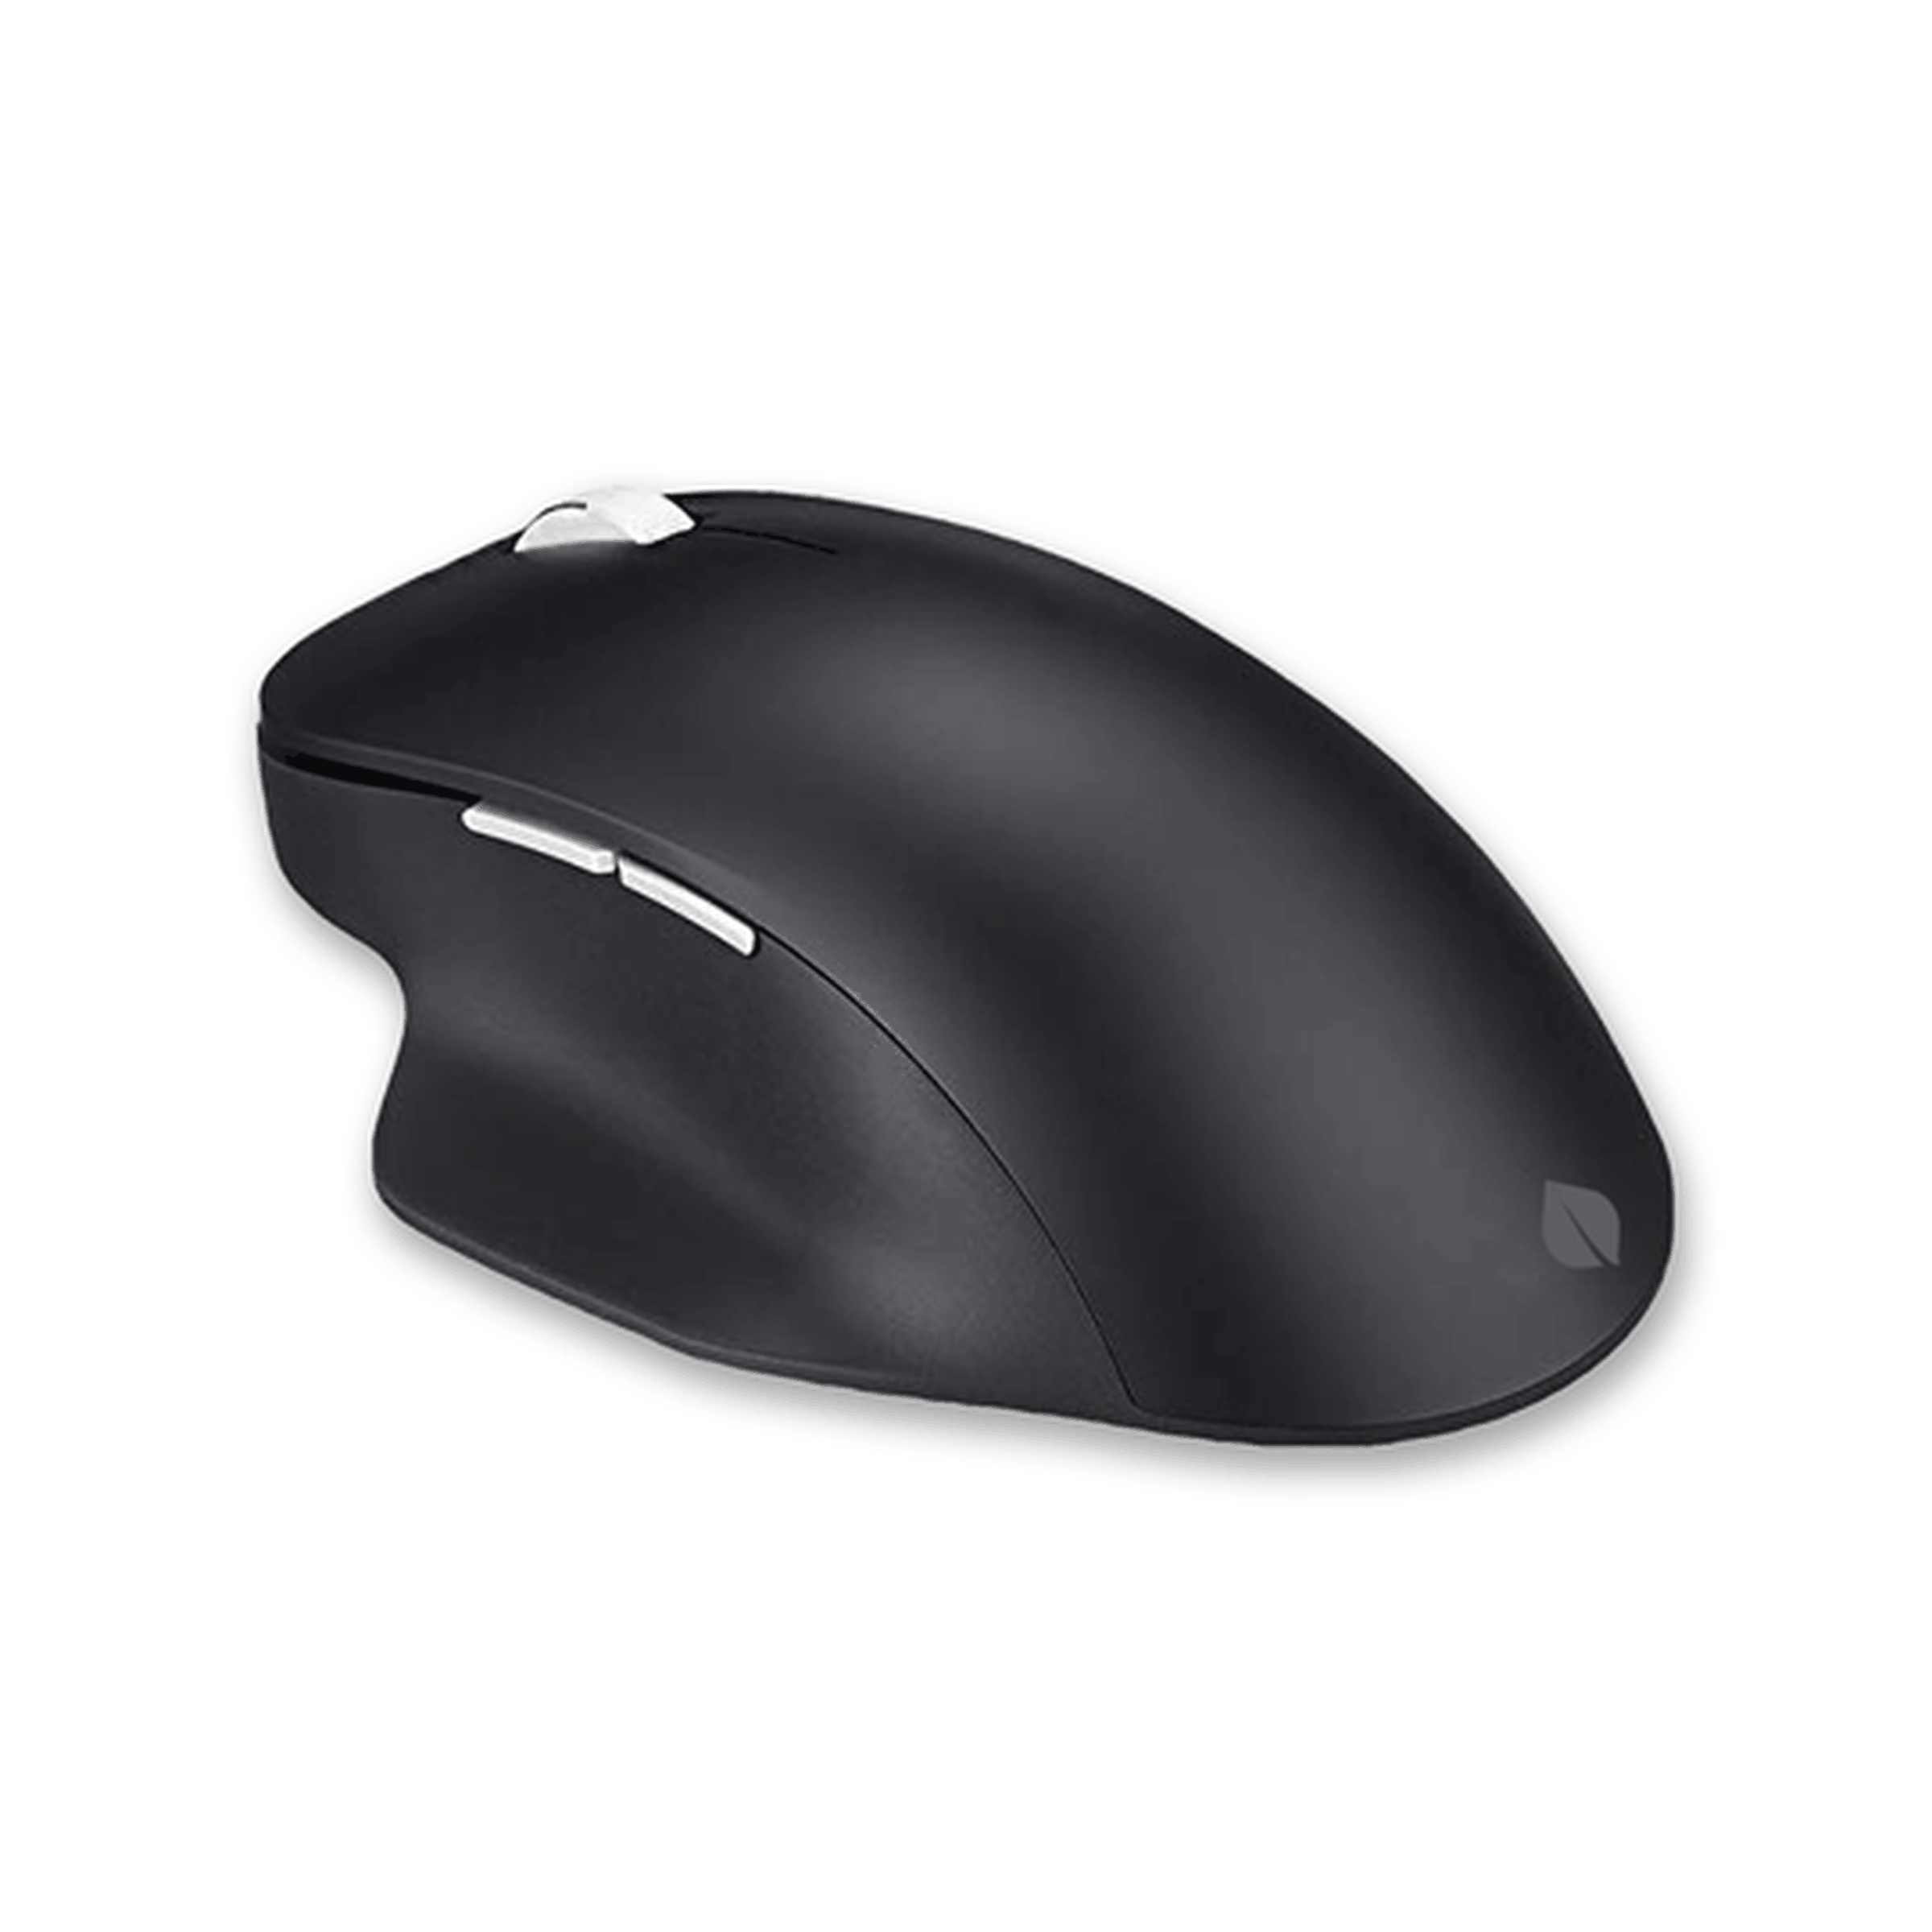 The Incase logo replaces the Microsoft one on the Bluetooth ergonomic mouse.